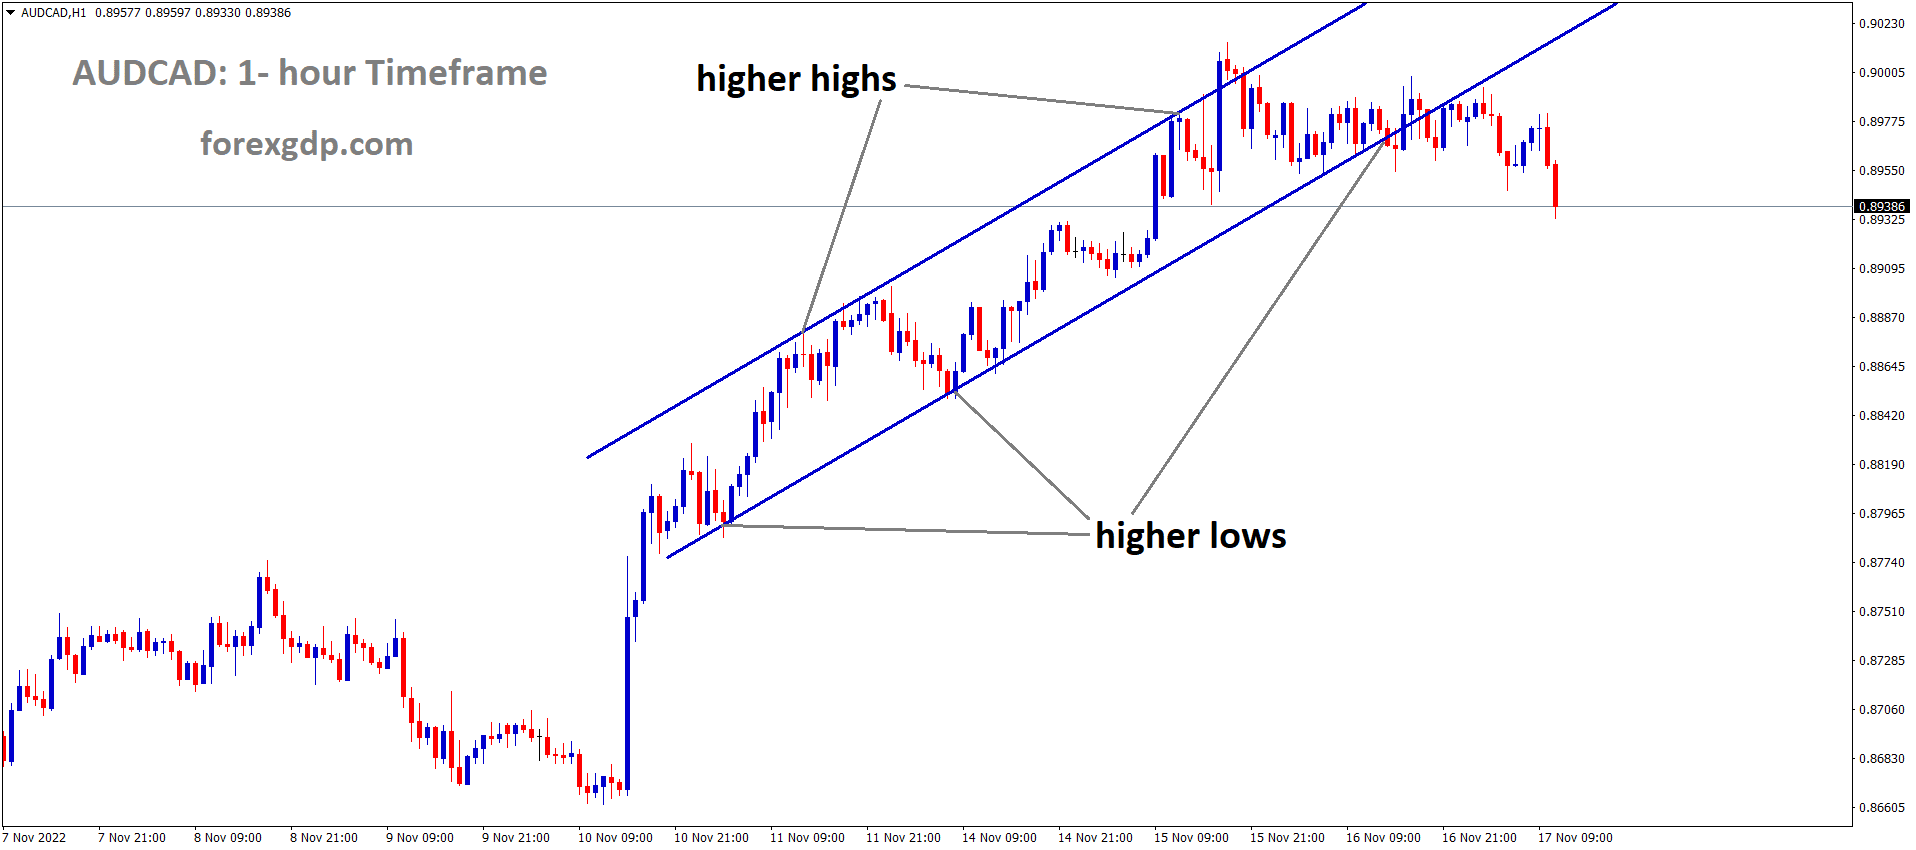 AUDCAD is moving in an ascending channel and the market has reached the higher low area of the channel 1